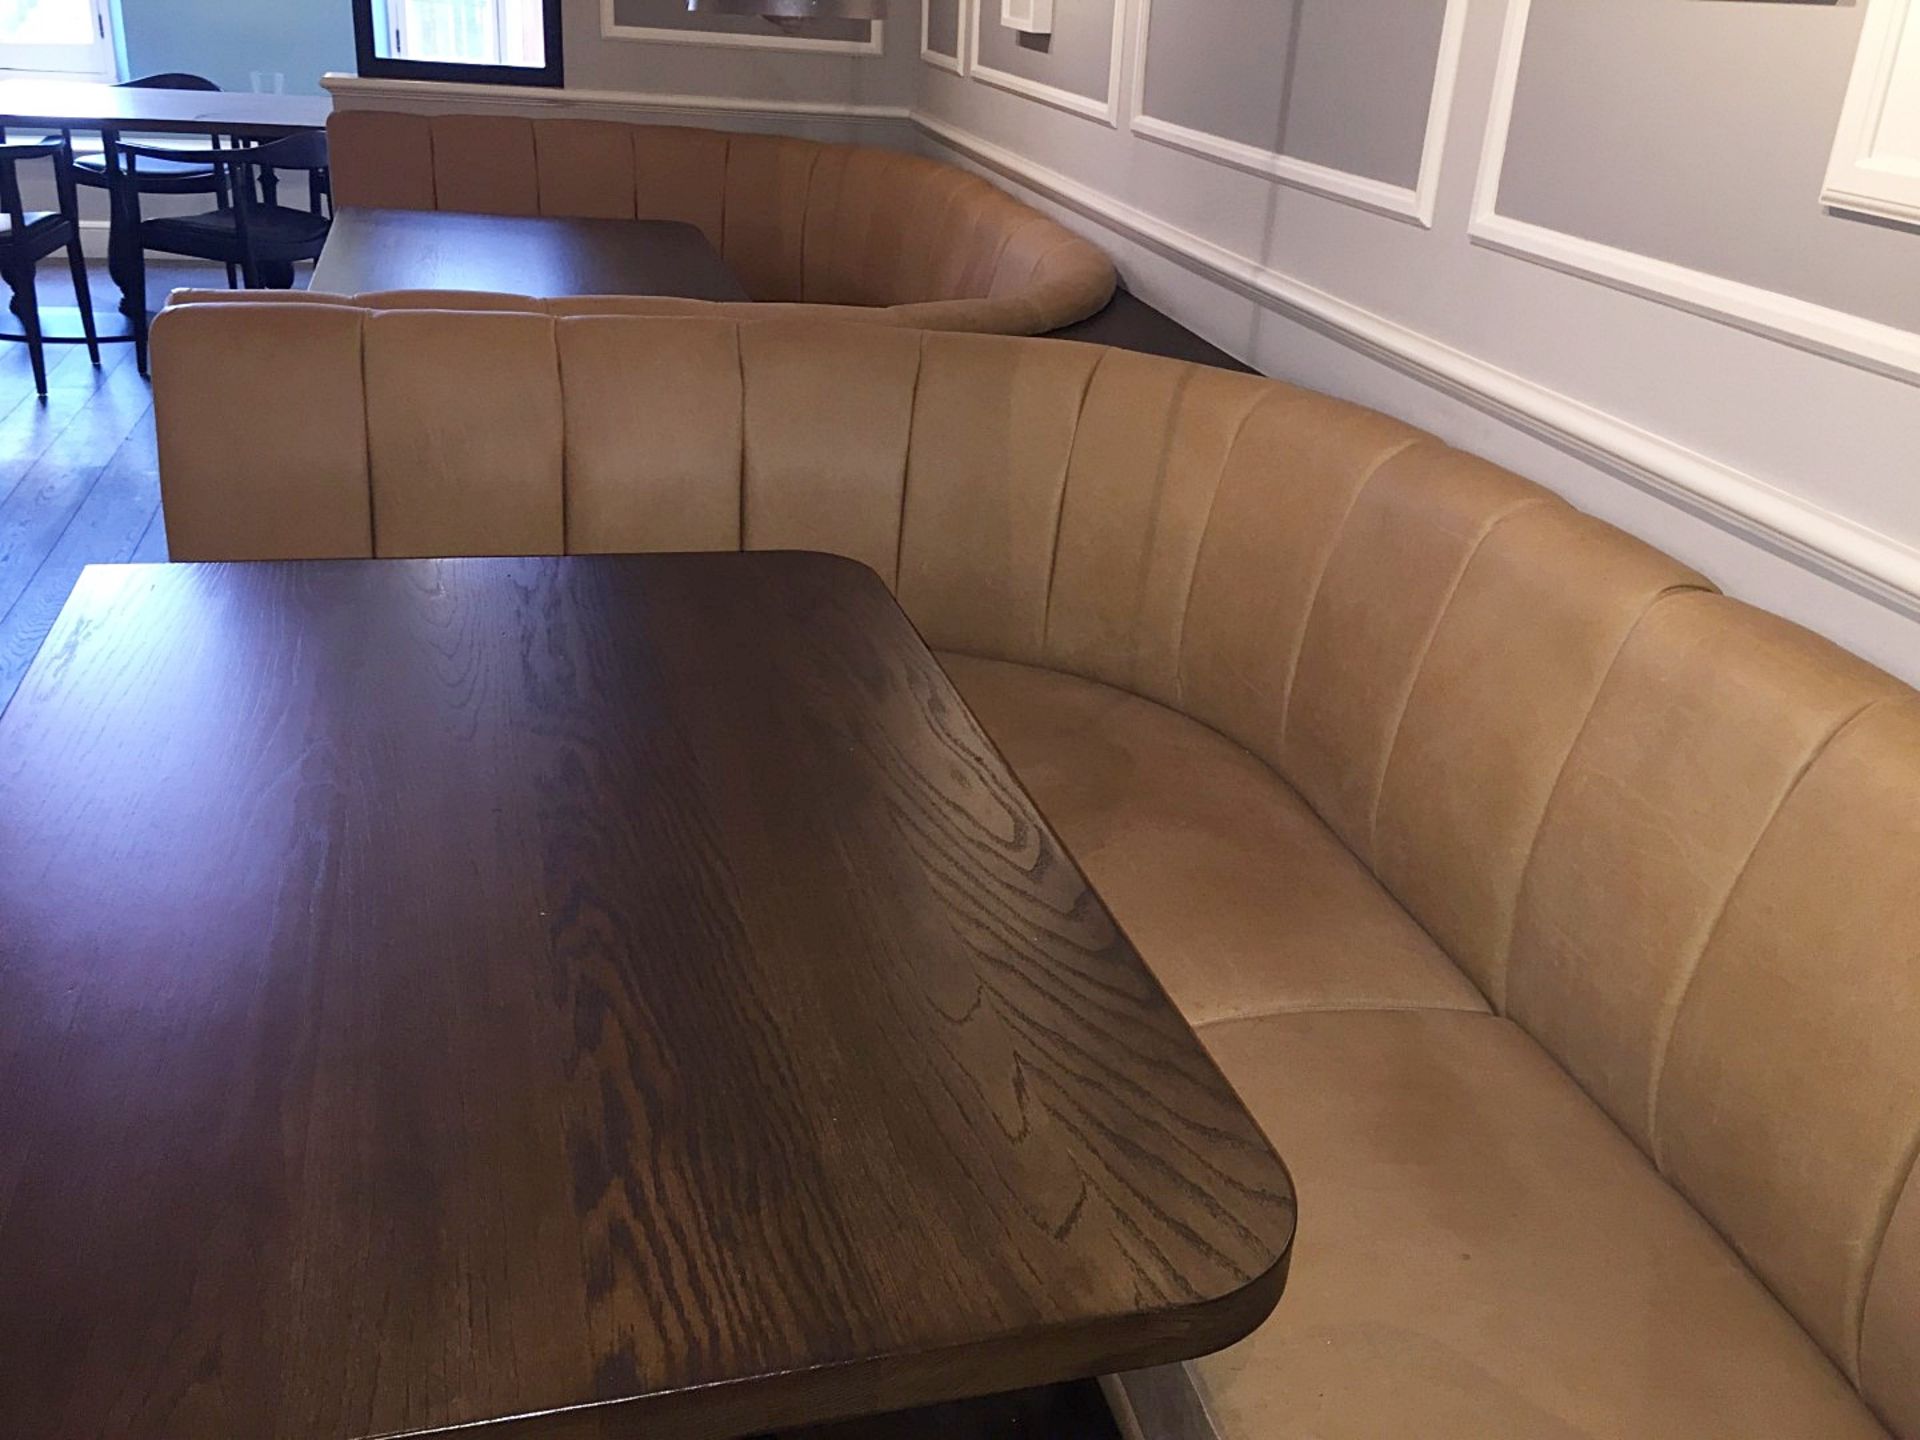 1 x Luxurious High End Curved Seating Booth - Tastefully Upholstered In Cream Leather with - Image 14 of 14